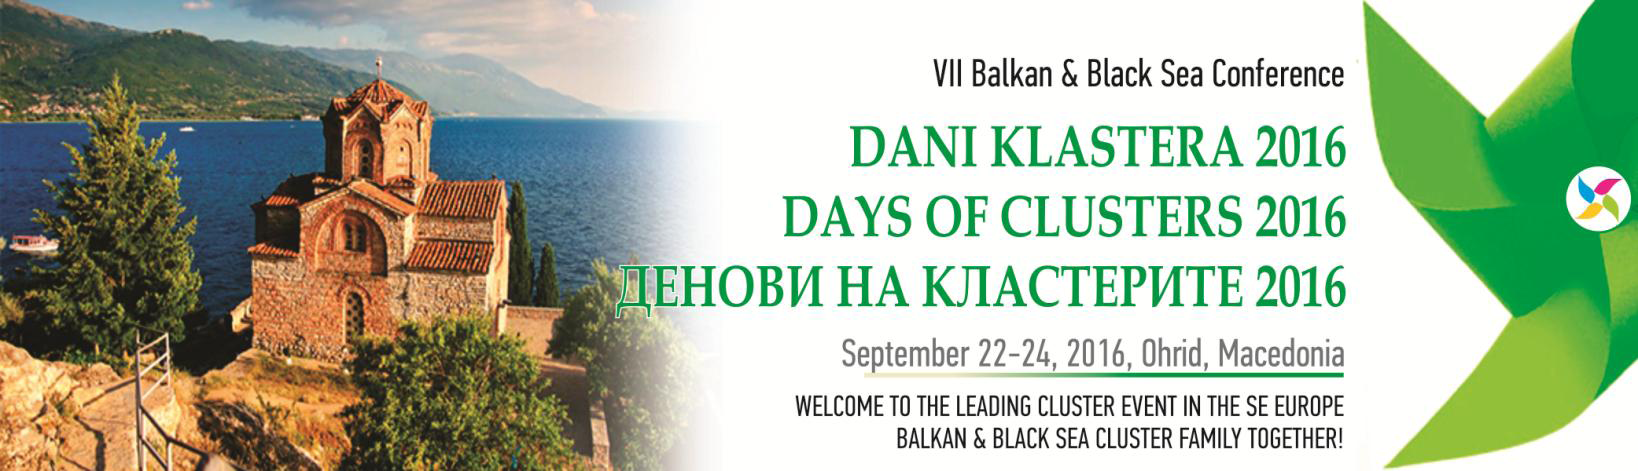 VII Balkan & Black Sea Conference DAYS OF CLUSTERS 2016